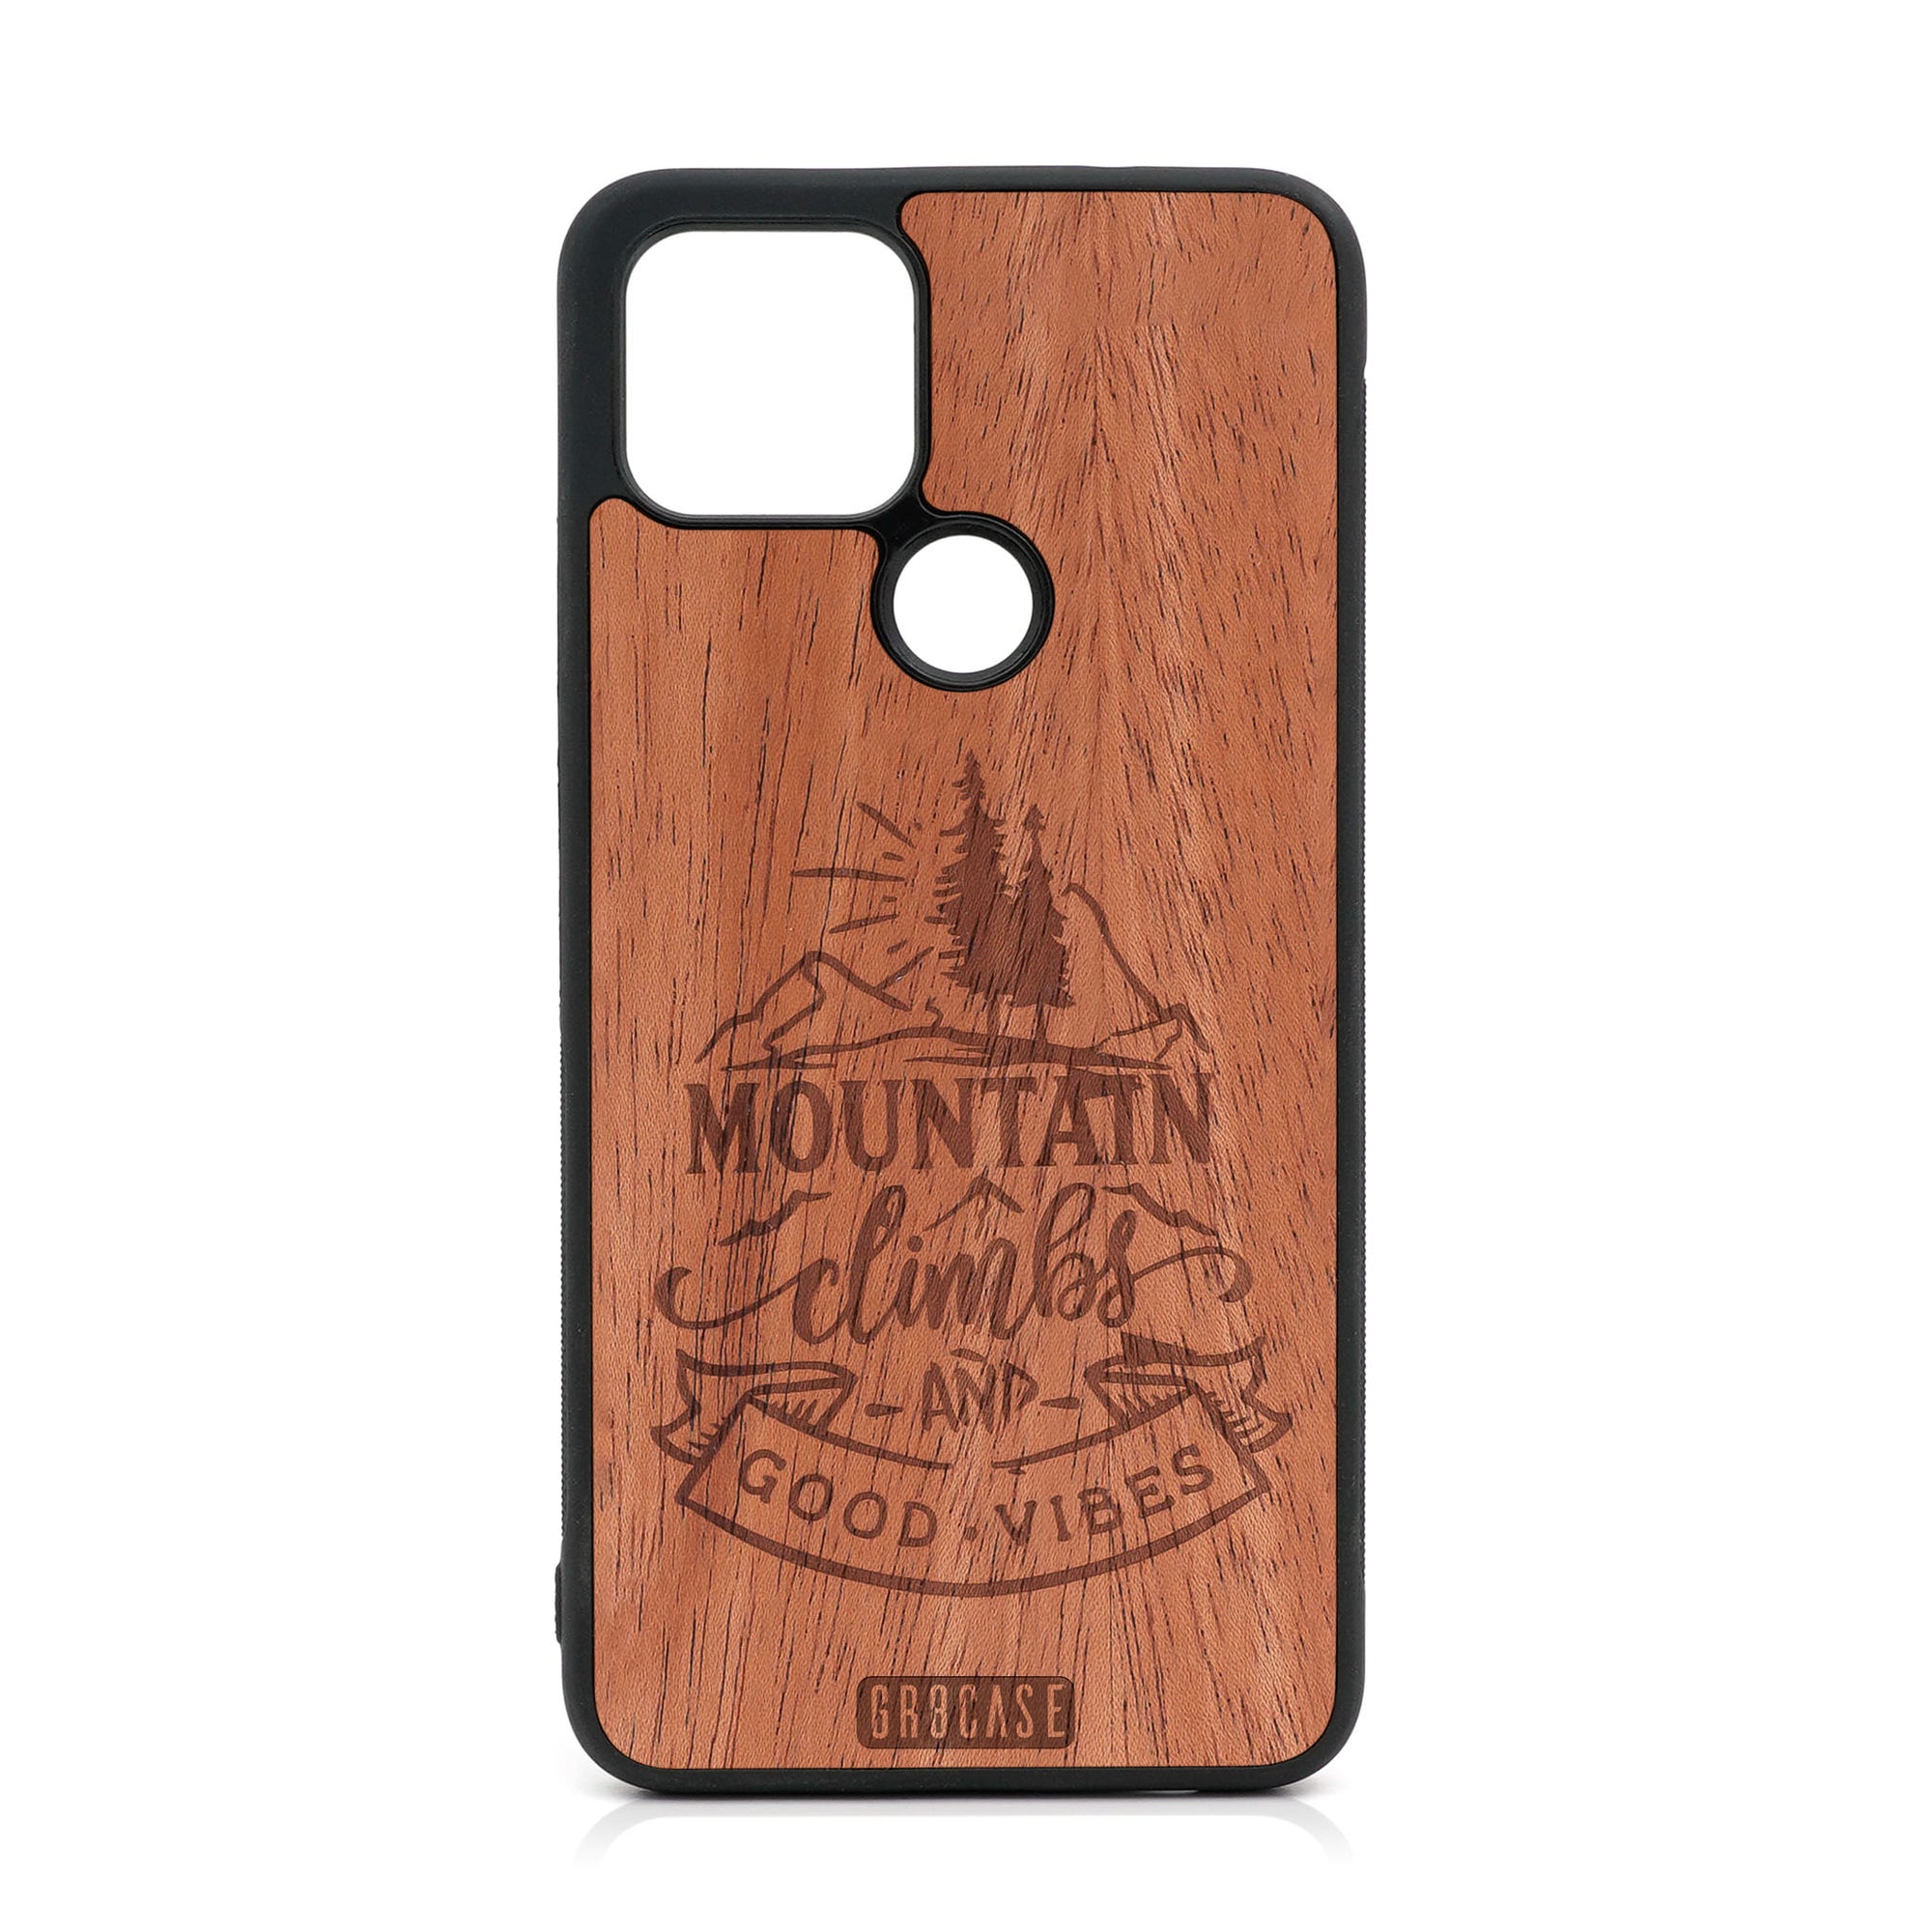 Mountain Climbs And Good Vibes Design Wood Case For Google Pixel 5 XL/4A 5G